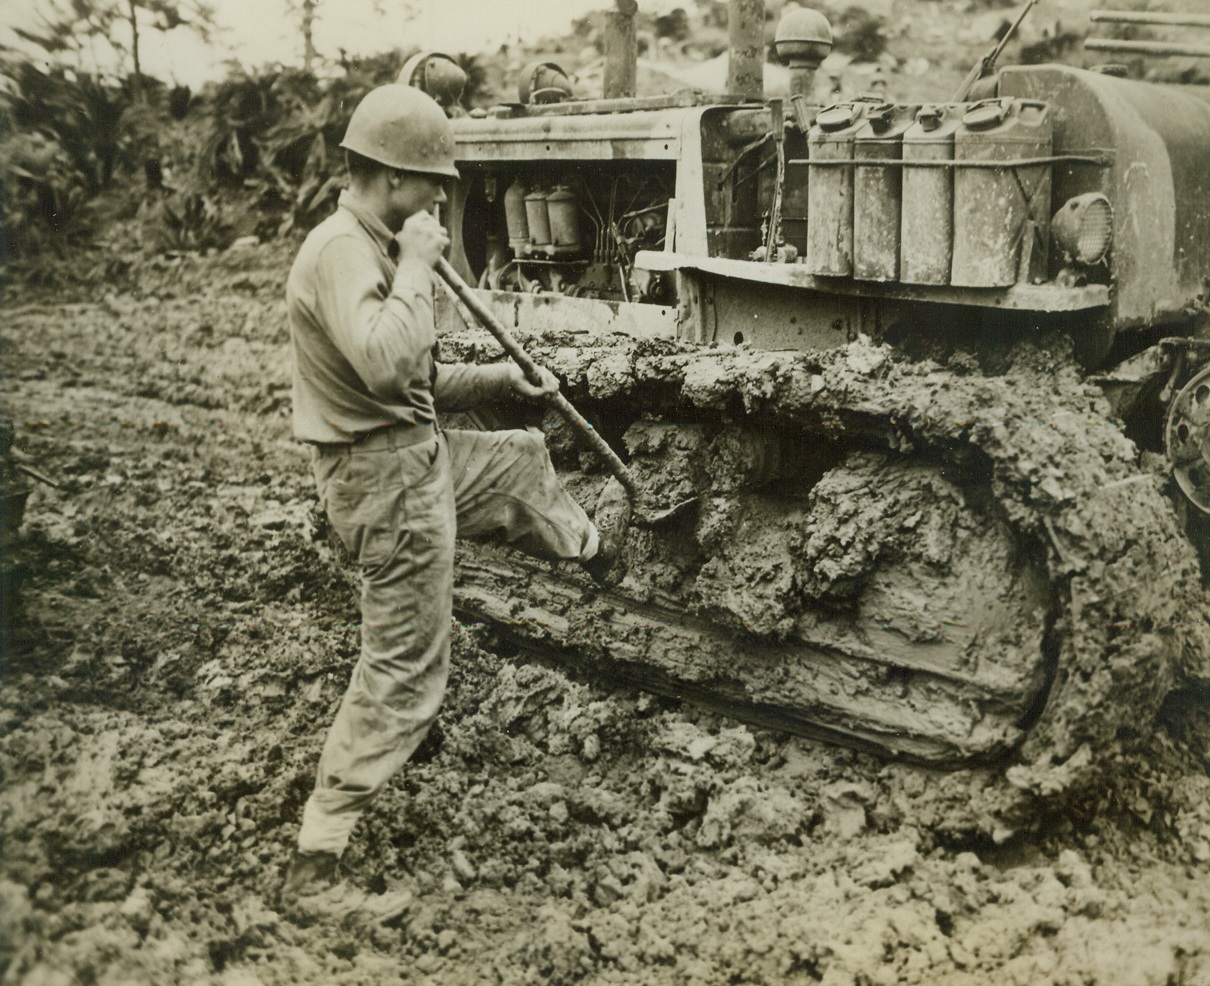 Digging Out On Okinawa, 6/11/1945. Okinawa -- At regular intervals, Marine ... Gilbert E. Bailey of Huntington W.V.,... to climb down and scrape shovelsful of... Okinawa mud from the tracks of his... The muck slows Yank progress on the ... down to a snail's pace. 6/11/45 Credit Line Marine Corps Photo From ACME;